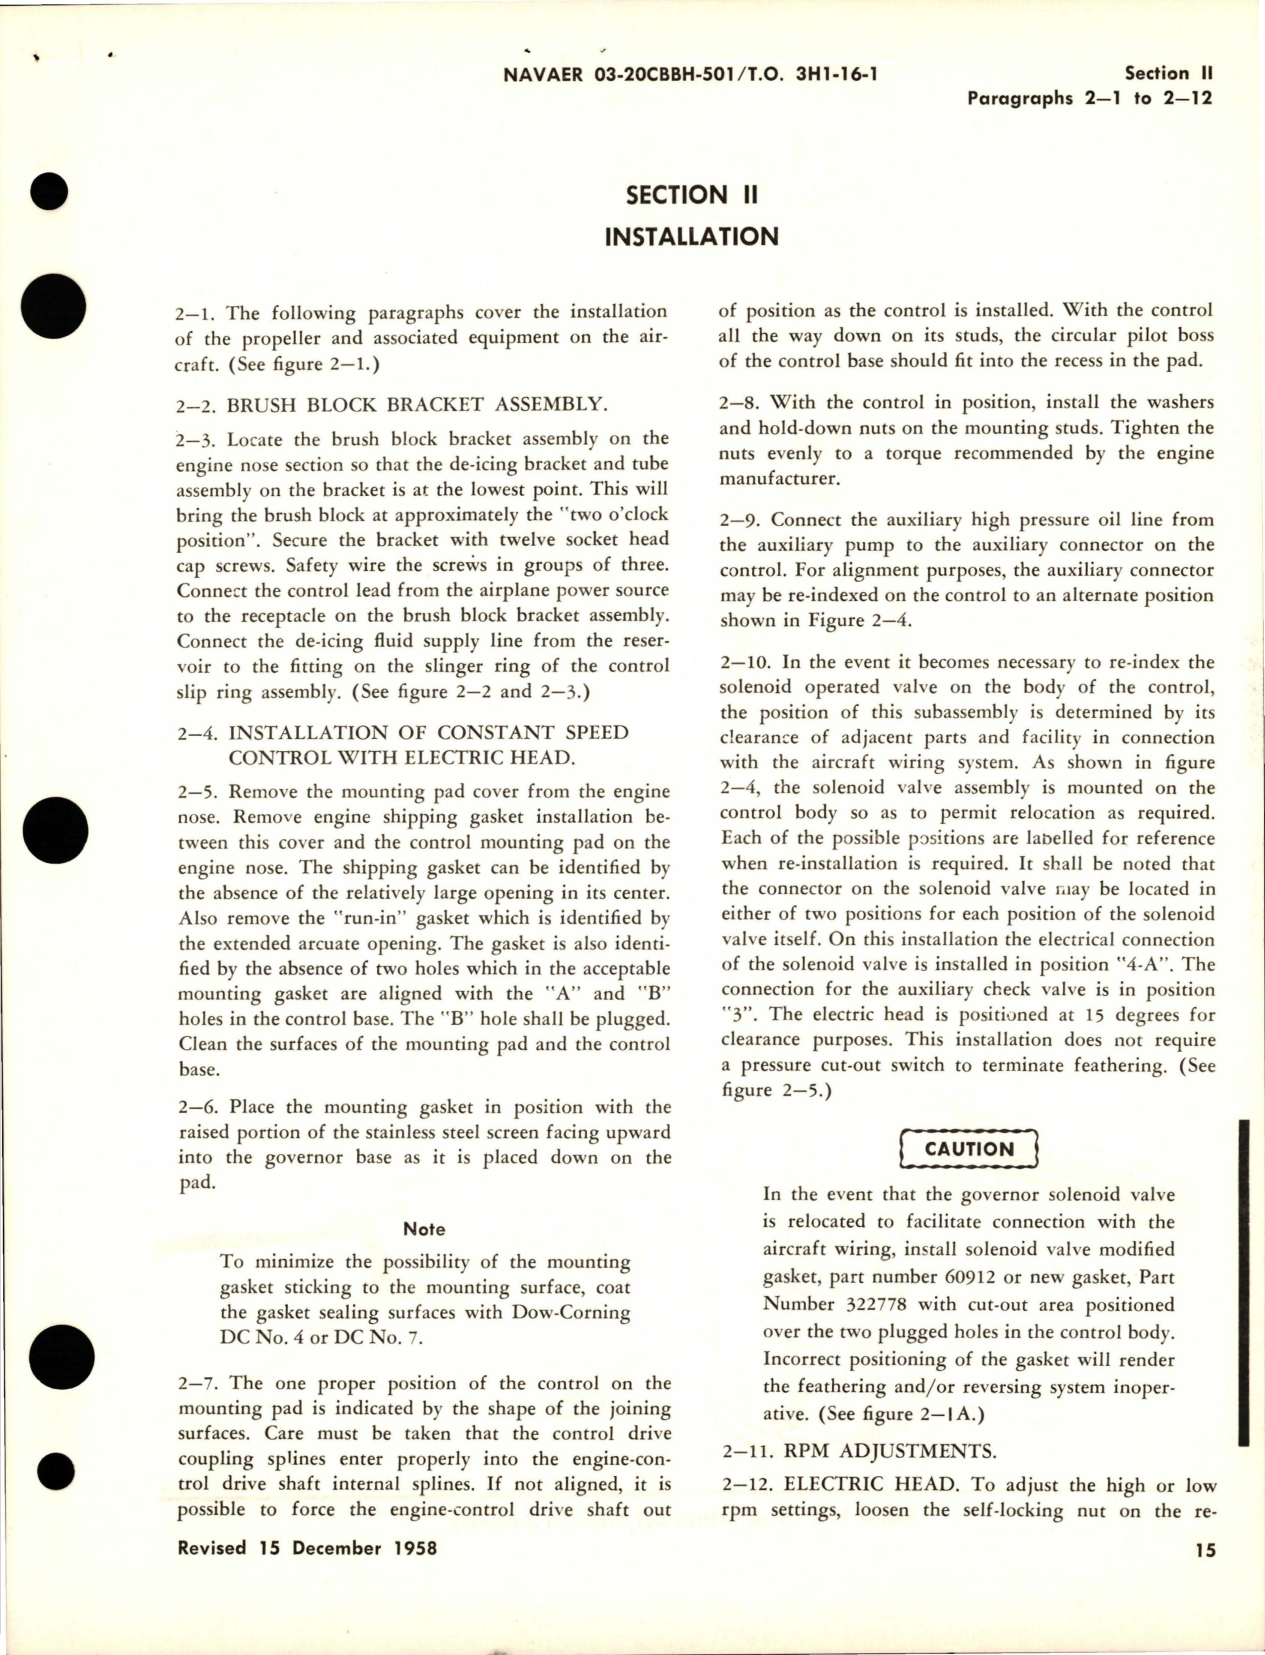 Sample page 7 from AirCorps Library document: Operation and Maintenance Instructions for Variable Pitch Propeller - Model 43H60-341 and 43H60-367